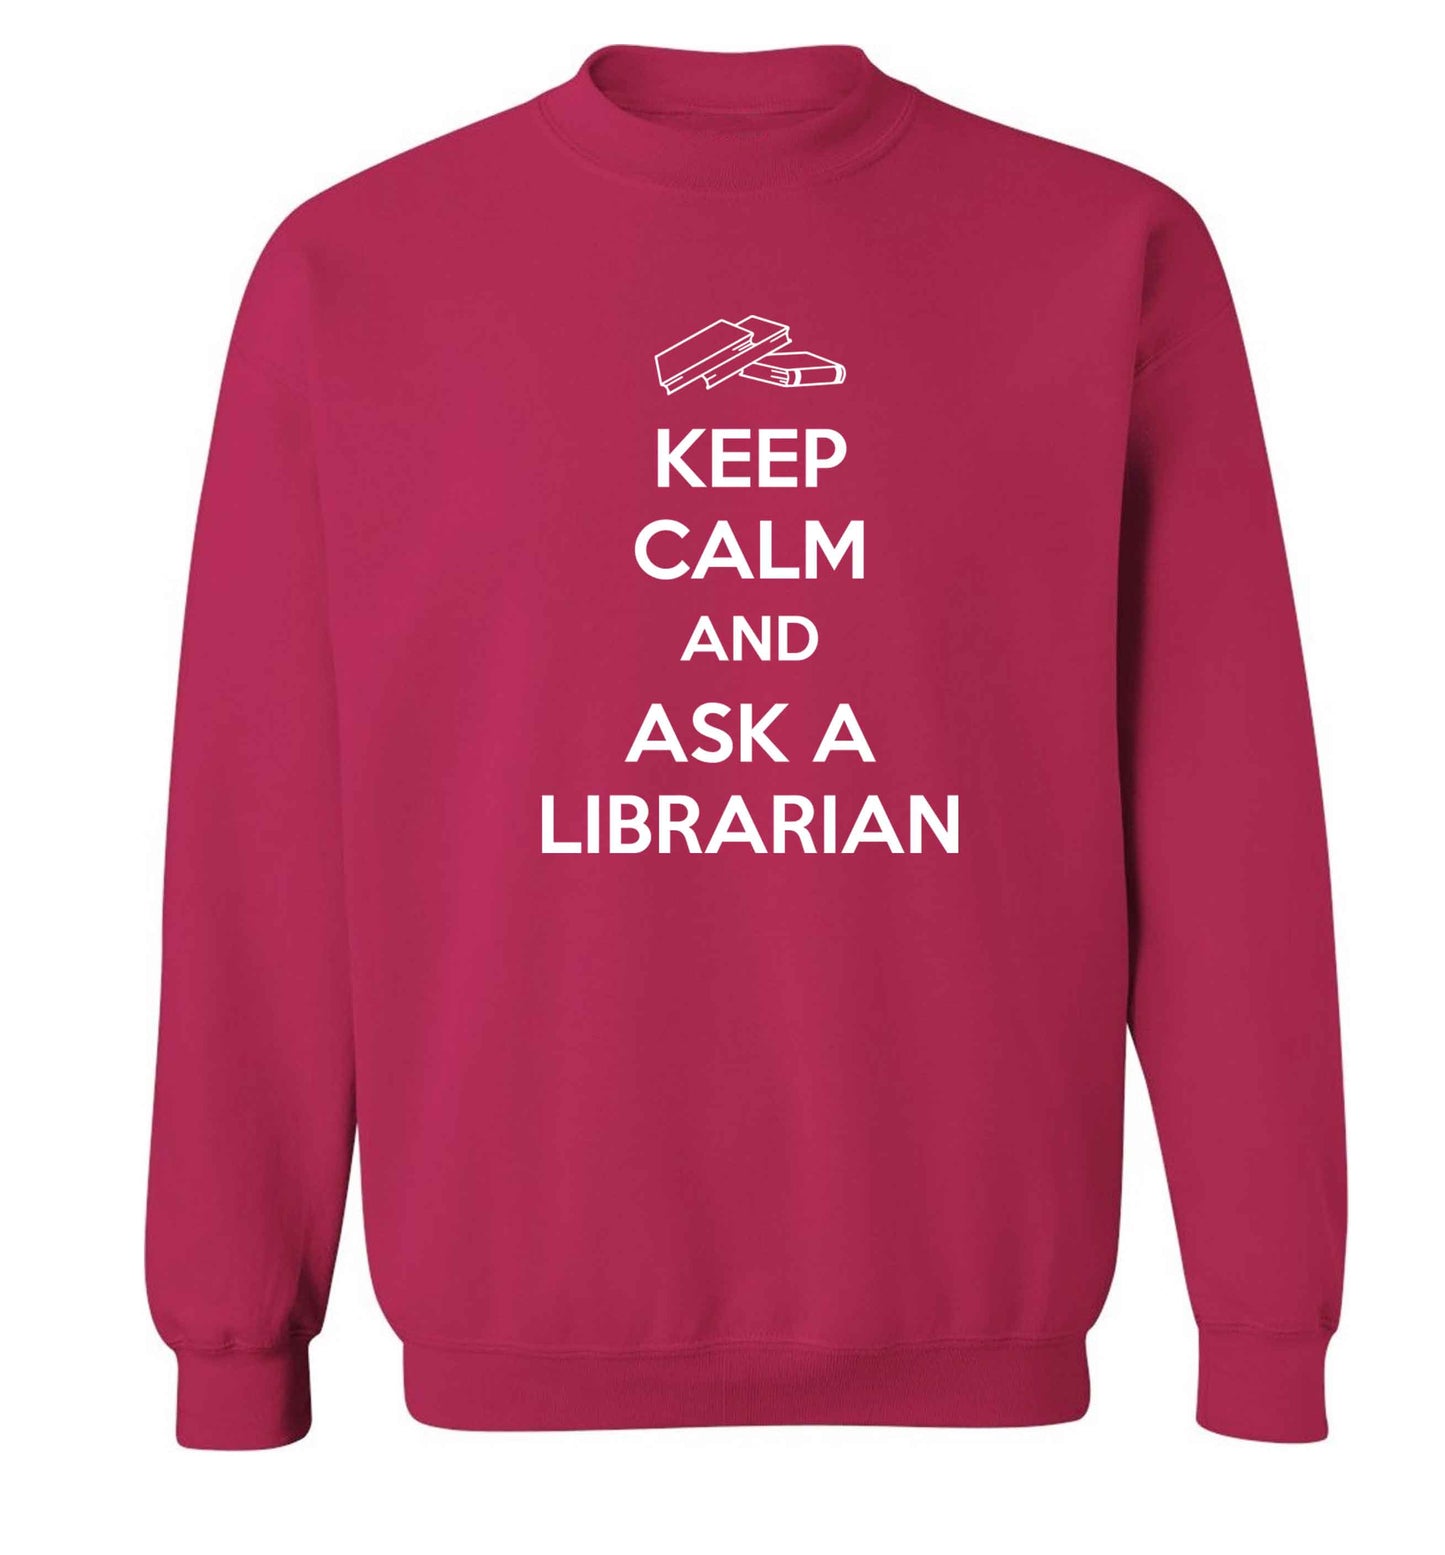 Keep calm and ask a librarian Adult's unisex pink Sweater 2XL